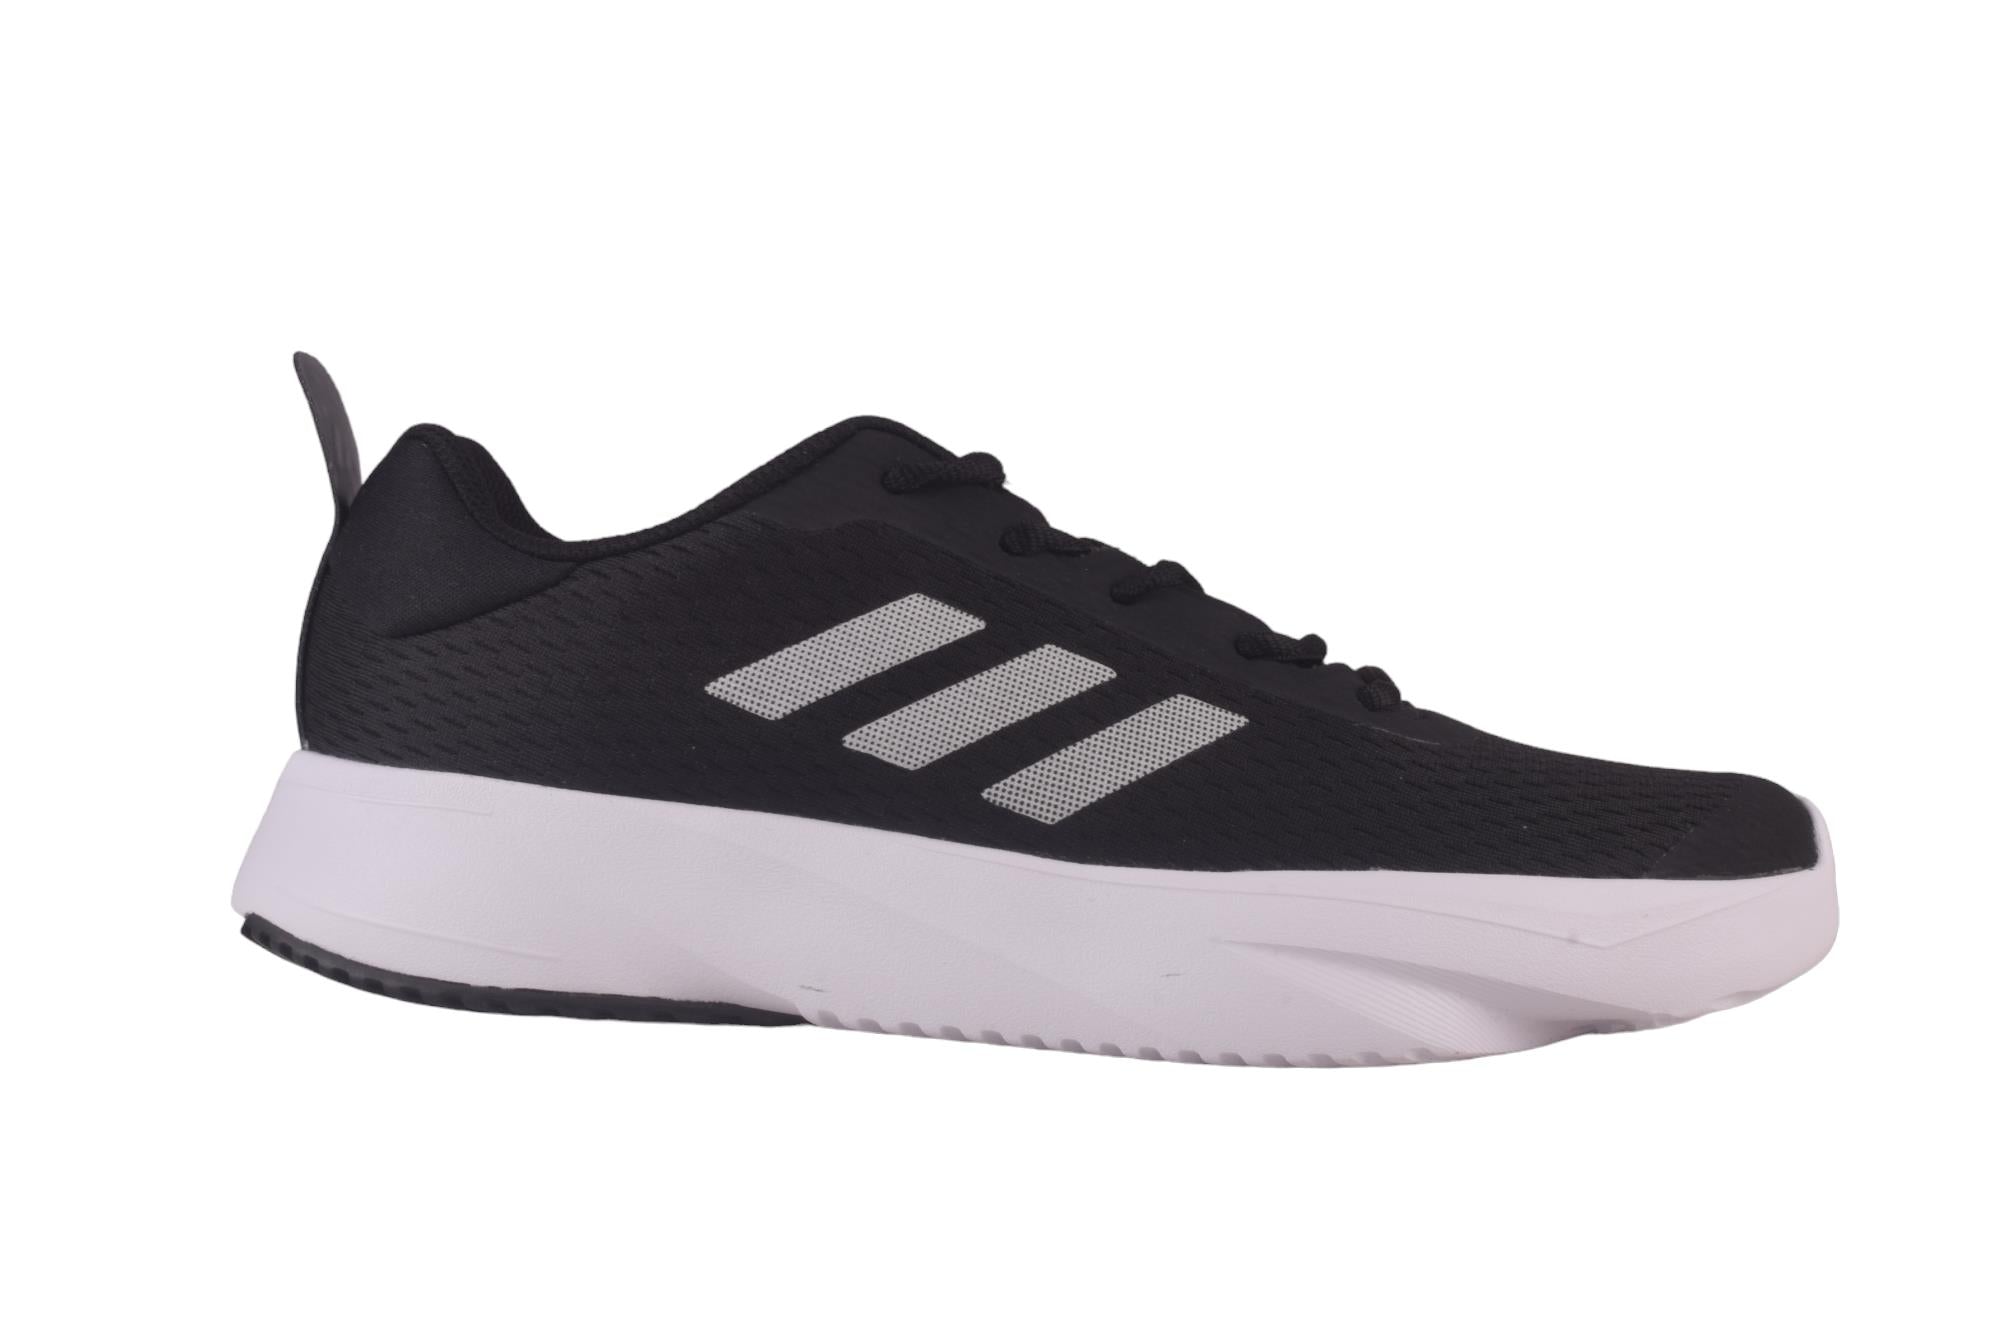 Adidas BaseFWD IU6397 Men's Running Shoes - Conquer the Miles in Style